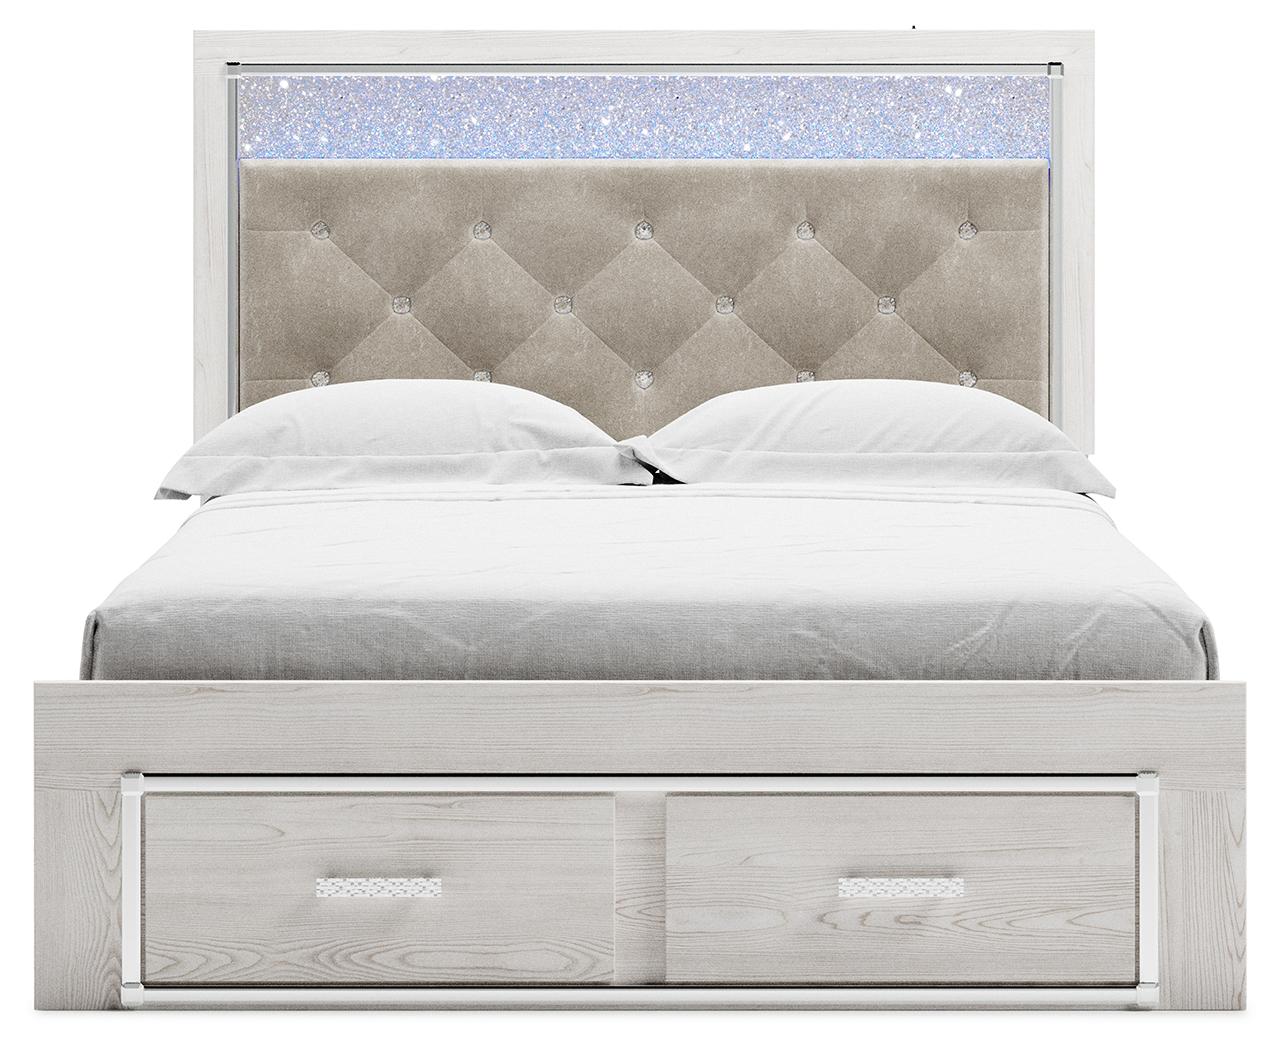 ASHLEY FURNITURE B2640B17 Altyra Queen Upholstered Storage Bed